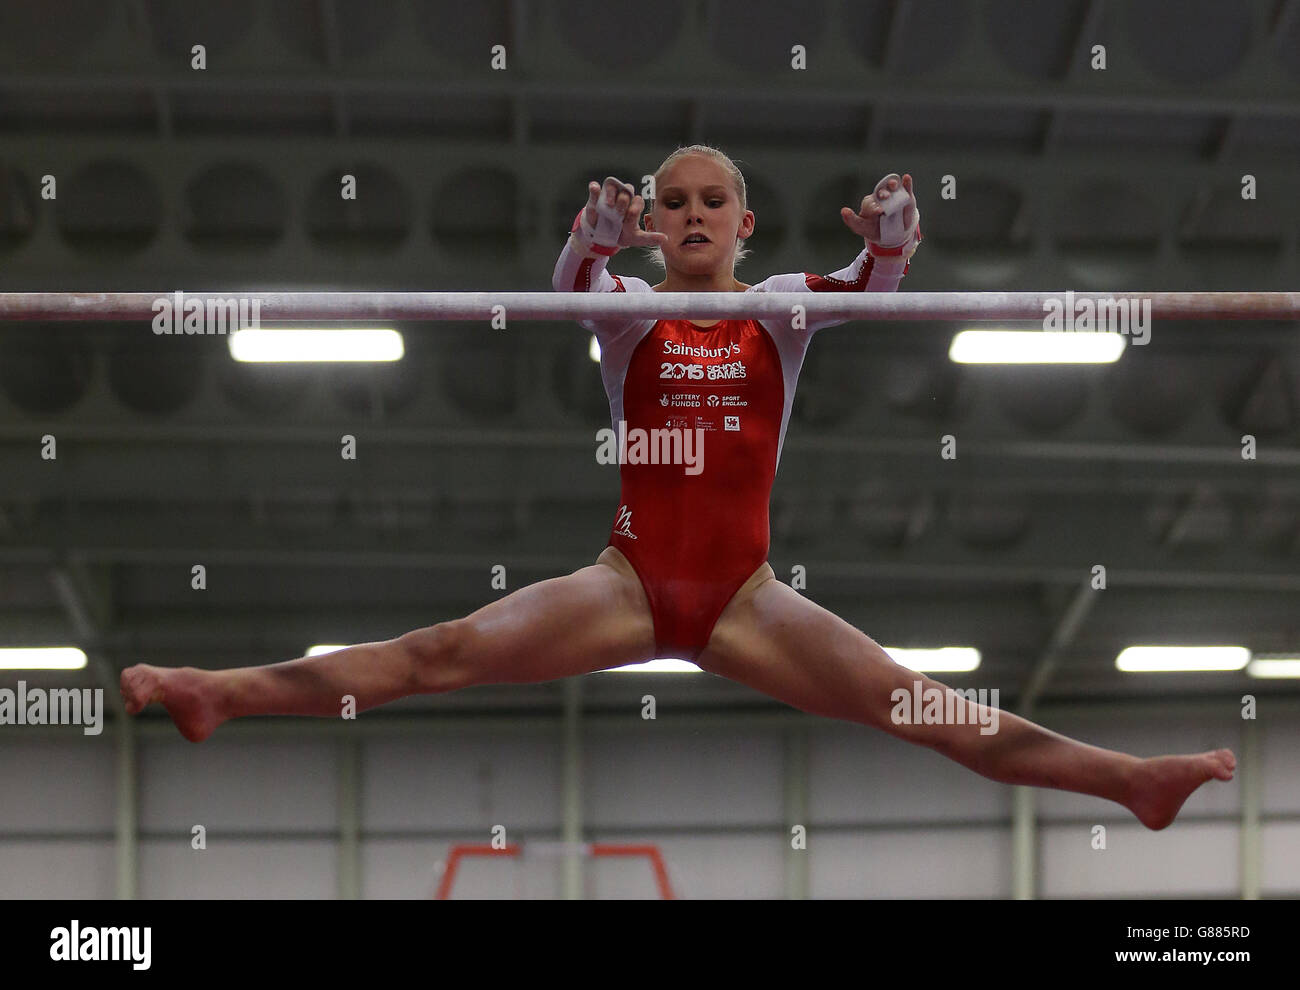 England's Taeja James on the uneven bars in the gymnastics during the Sainsbury's 2015 School Games in Manchester. PRESS ASSOCIATION Photo. Picture date: Saturday September 5, 2015. Photo credit should read: Steven Paston/PA Wire Stock Photo